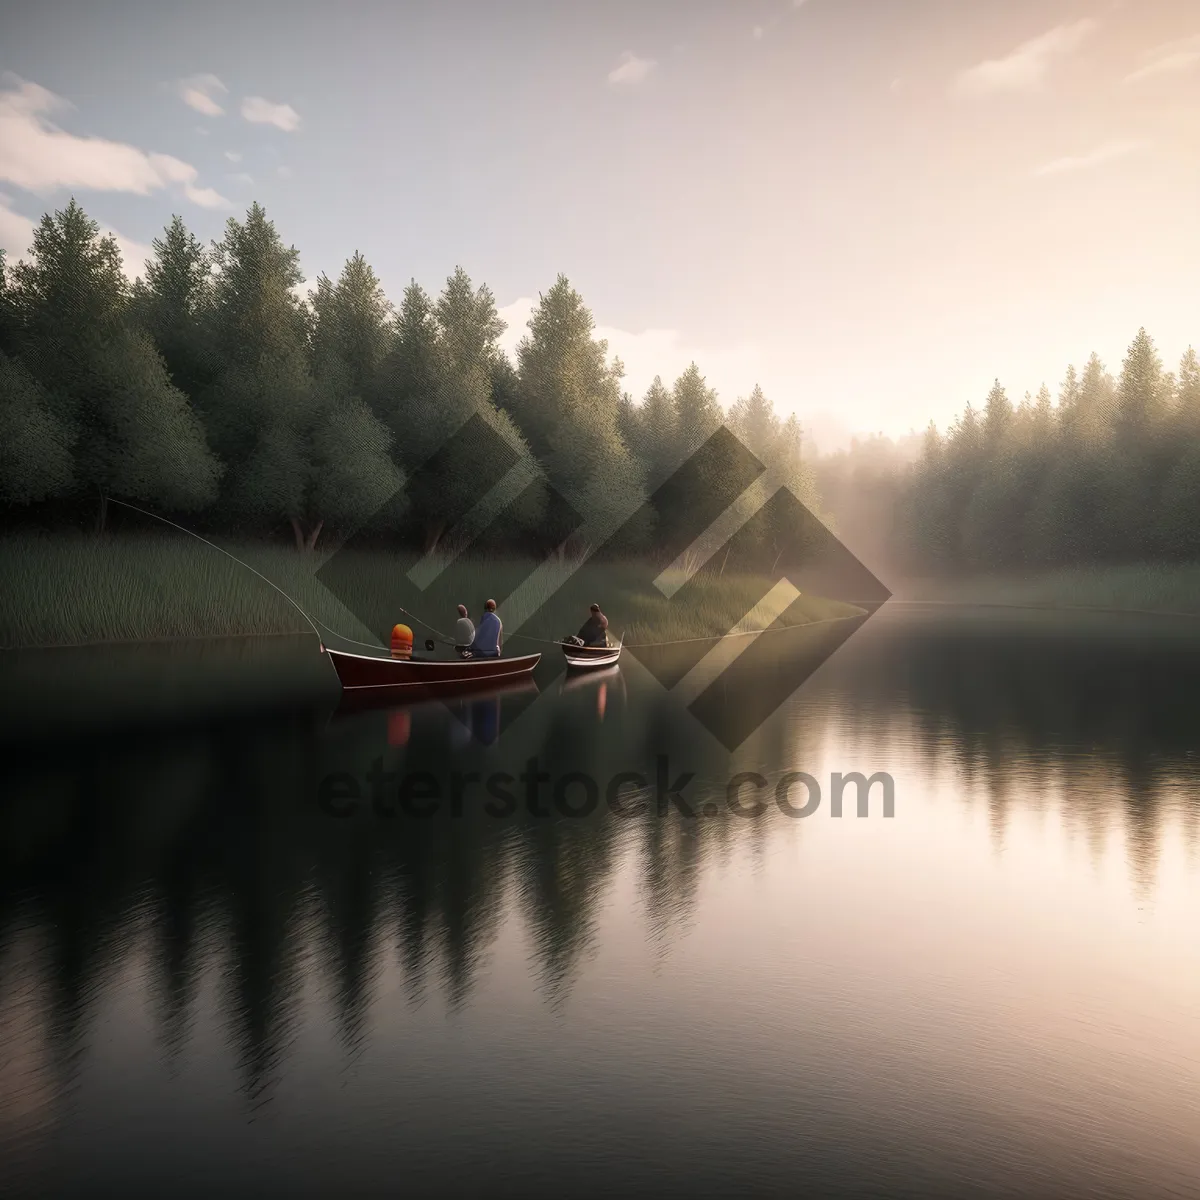 Picture of Serene Waters: Kayaking Amidst Reflections and Tranquil Forest